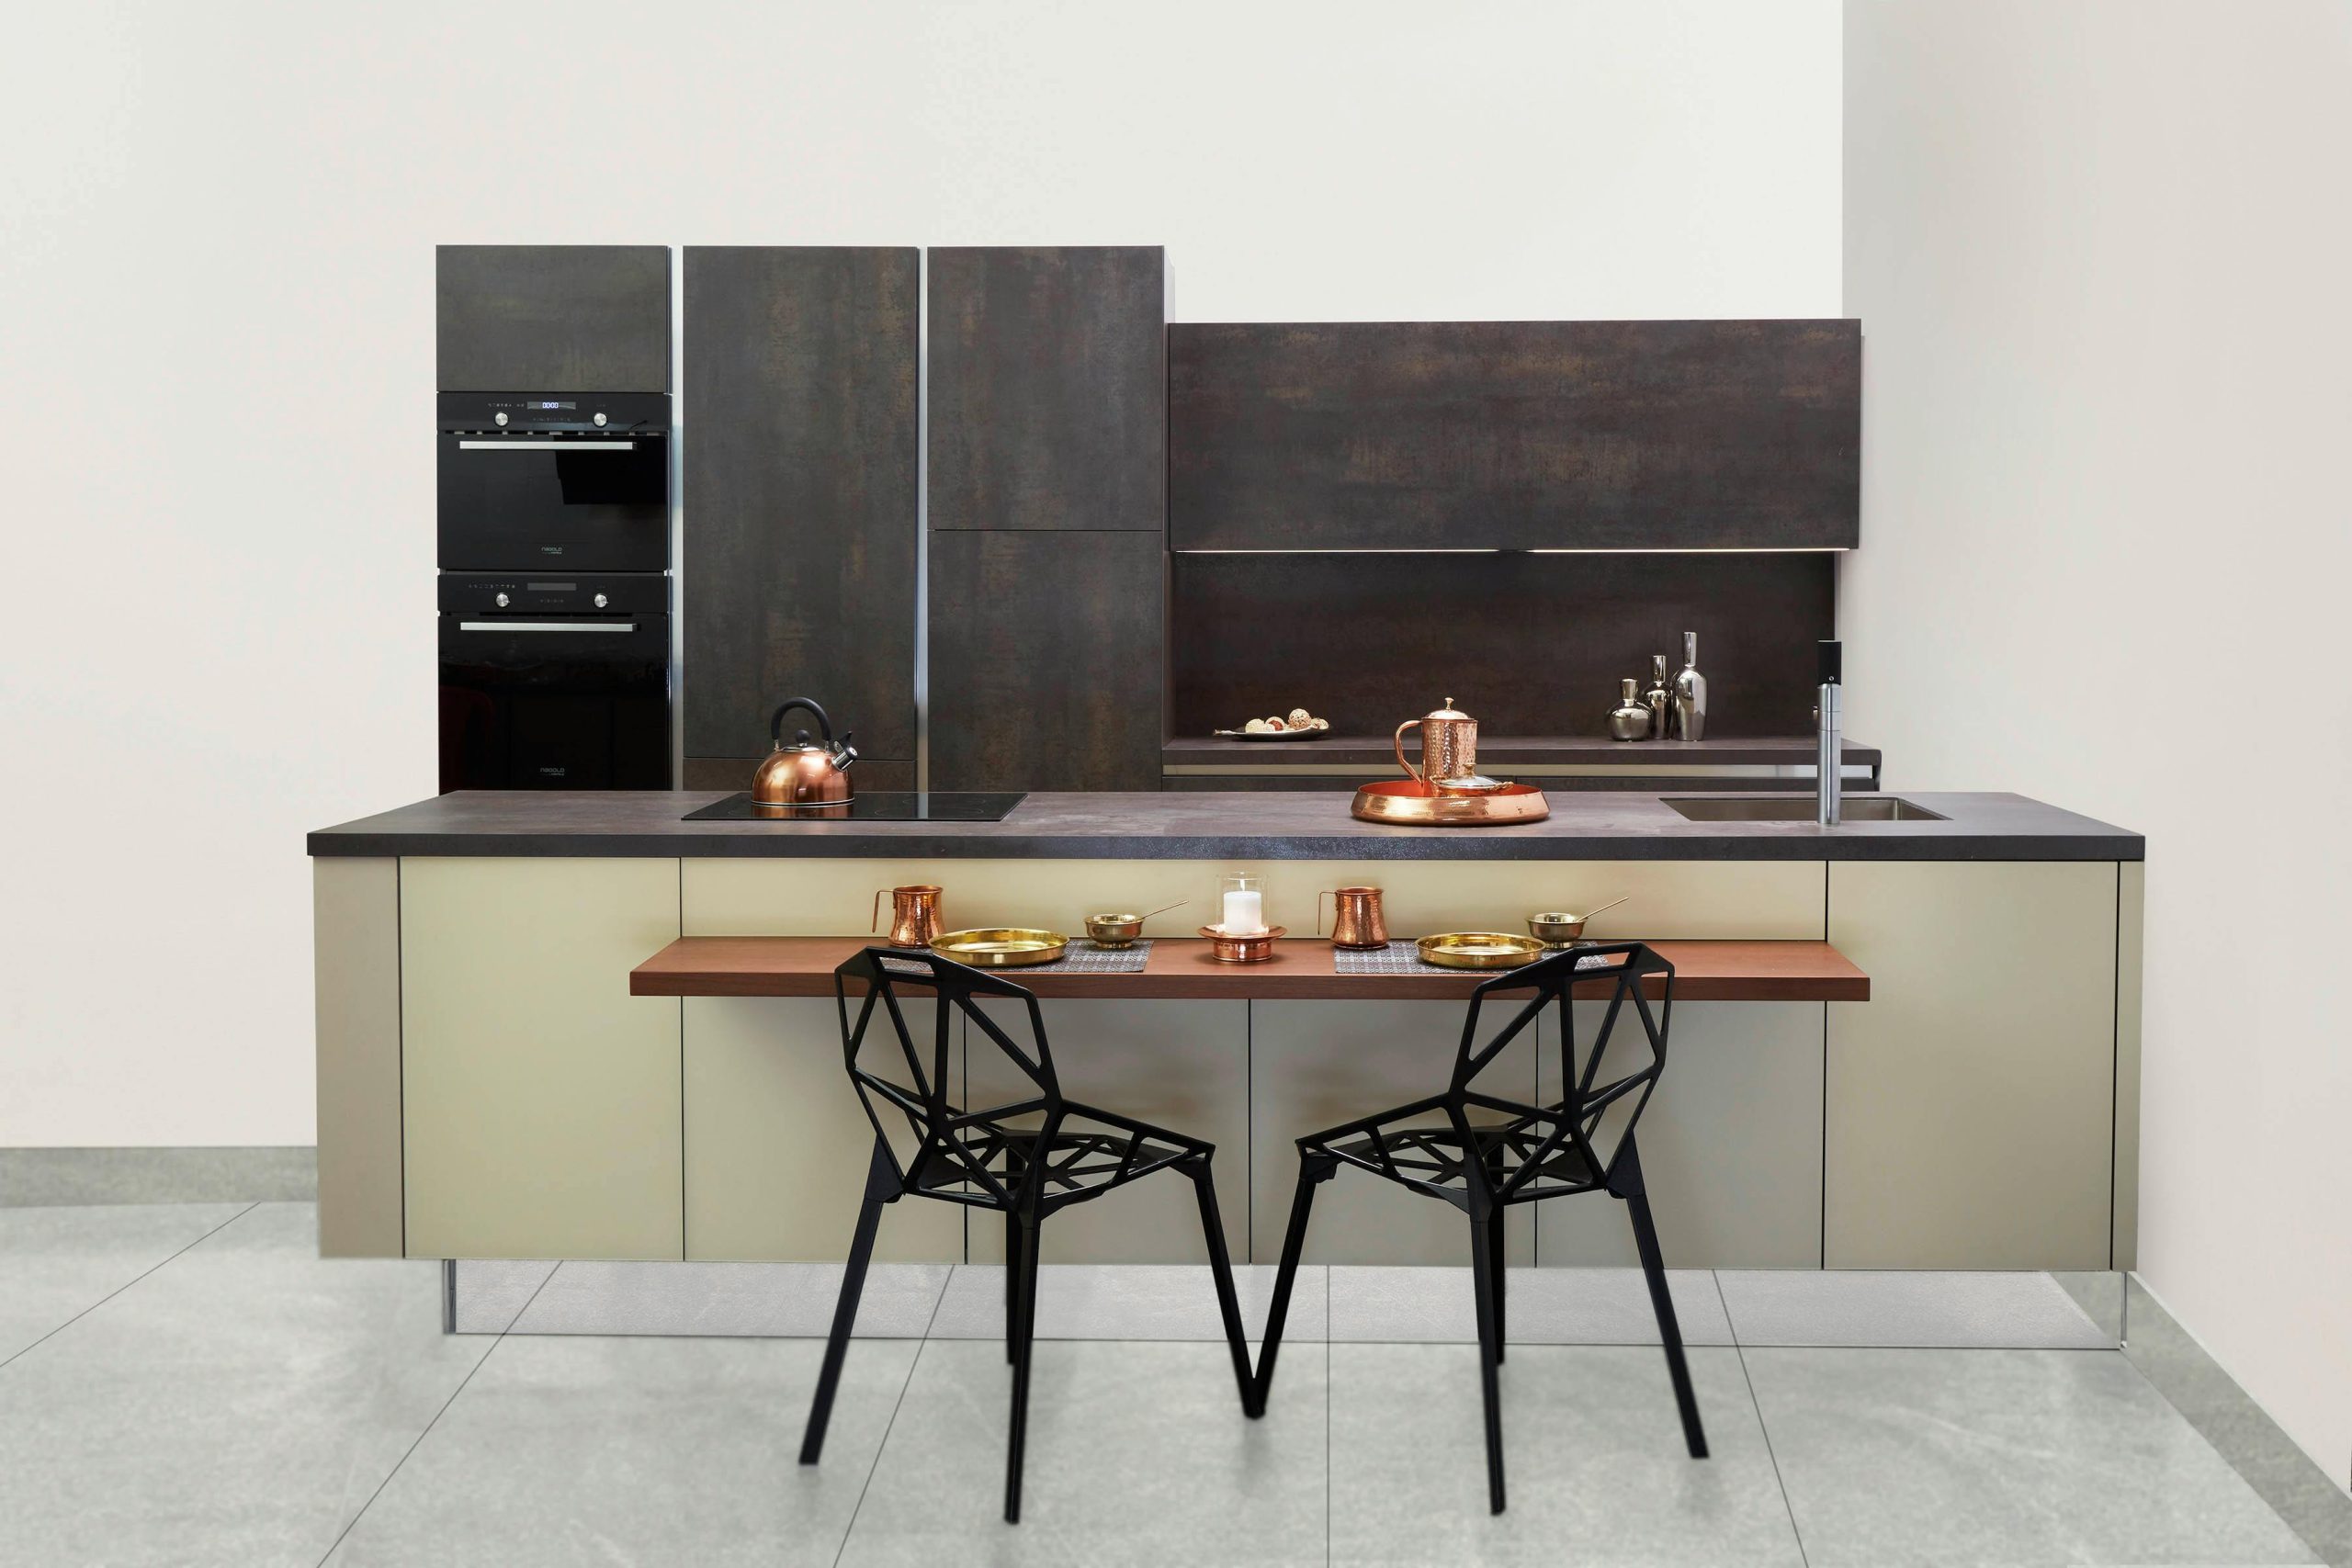 How to Choose the Right Cabinet Color for Your Kitchen